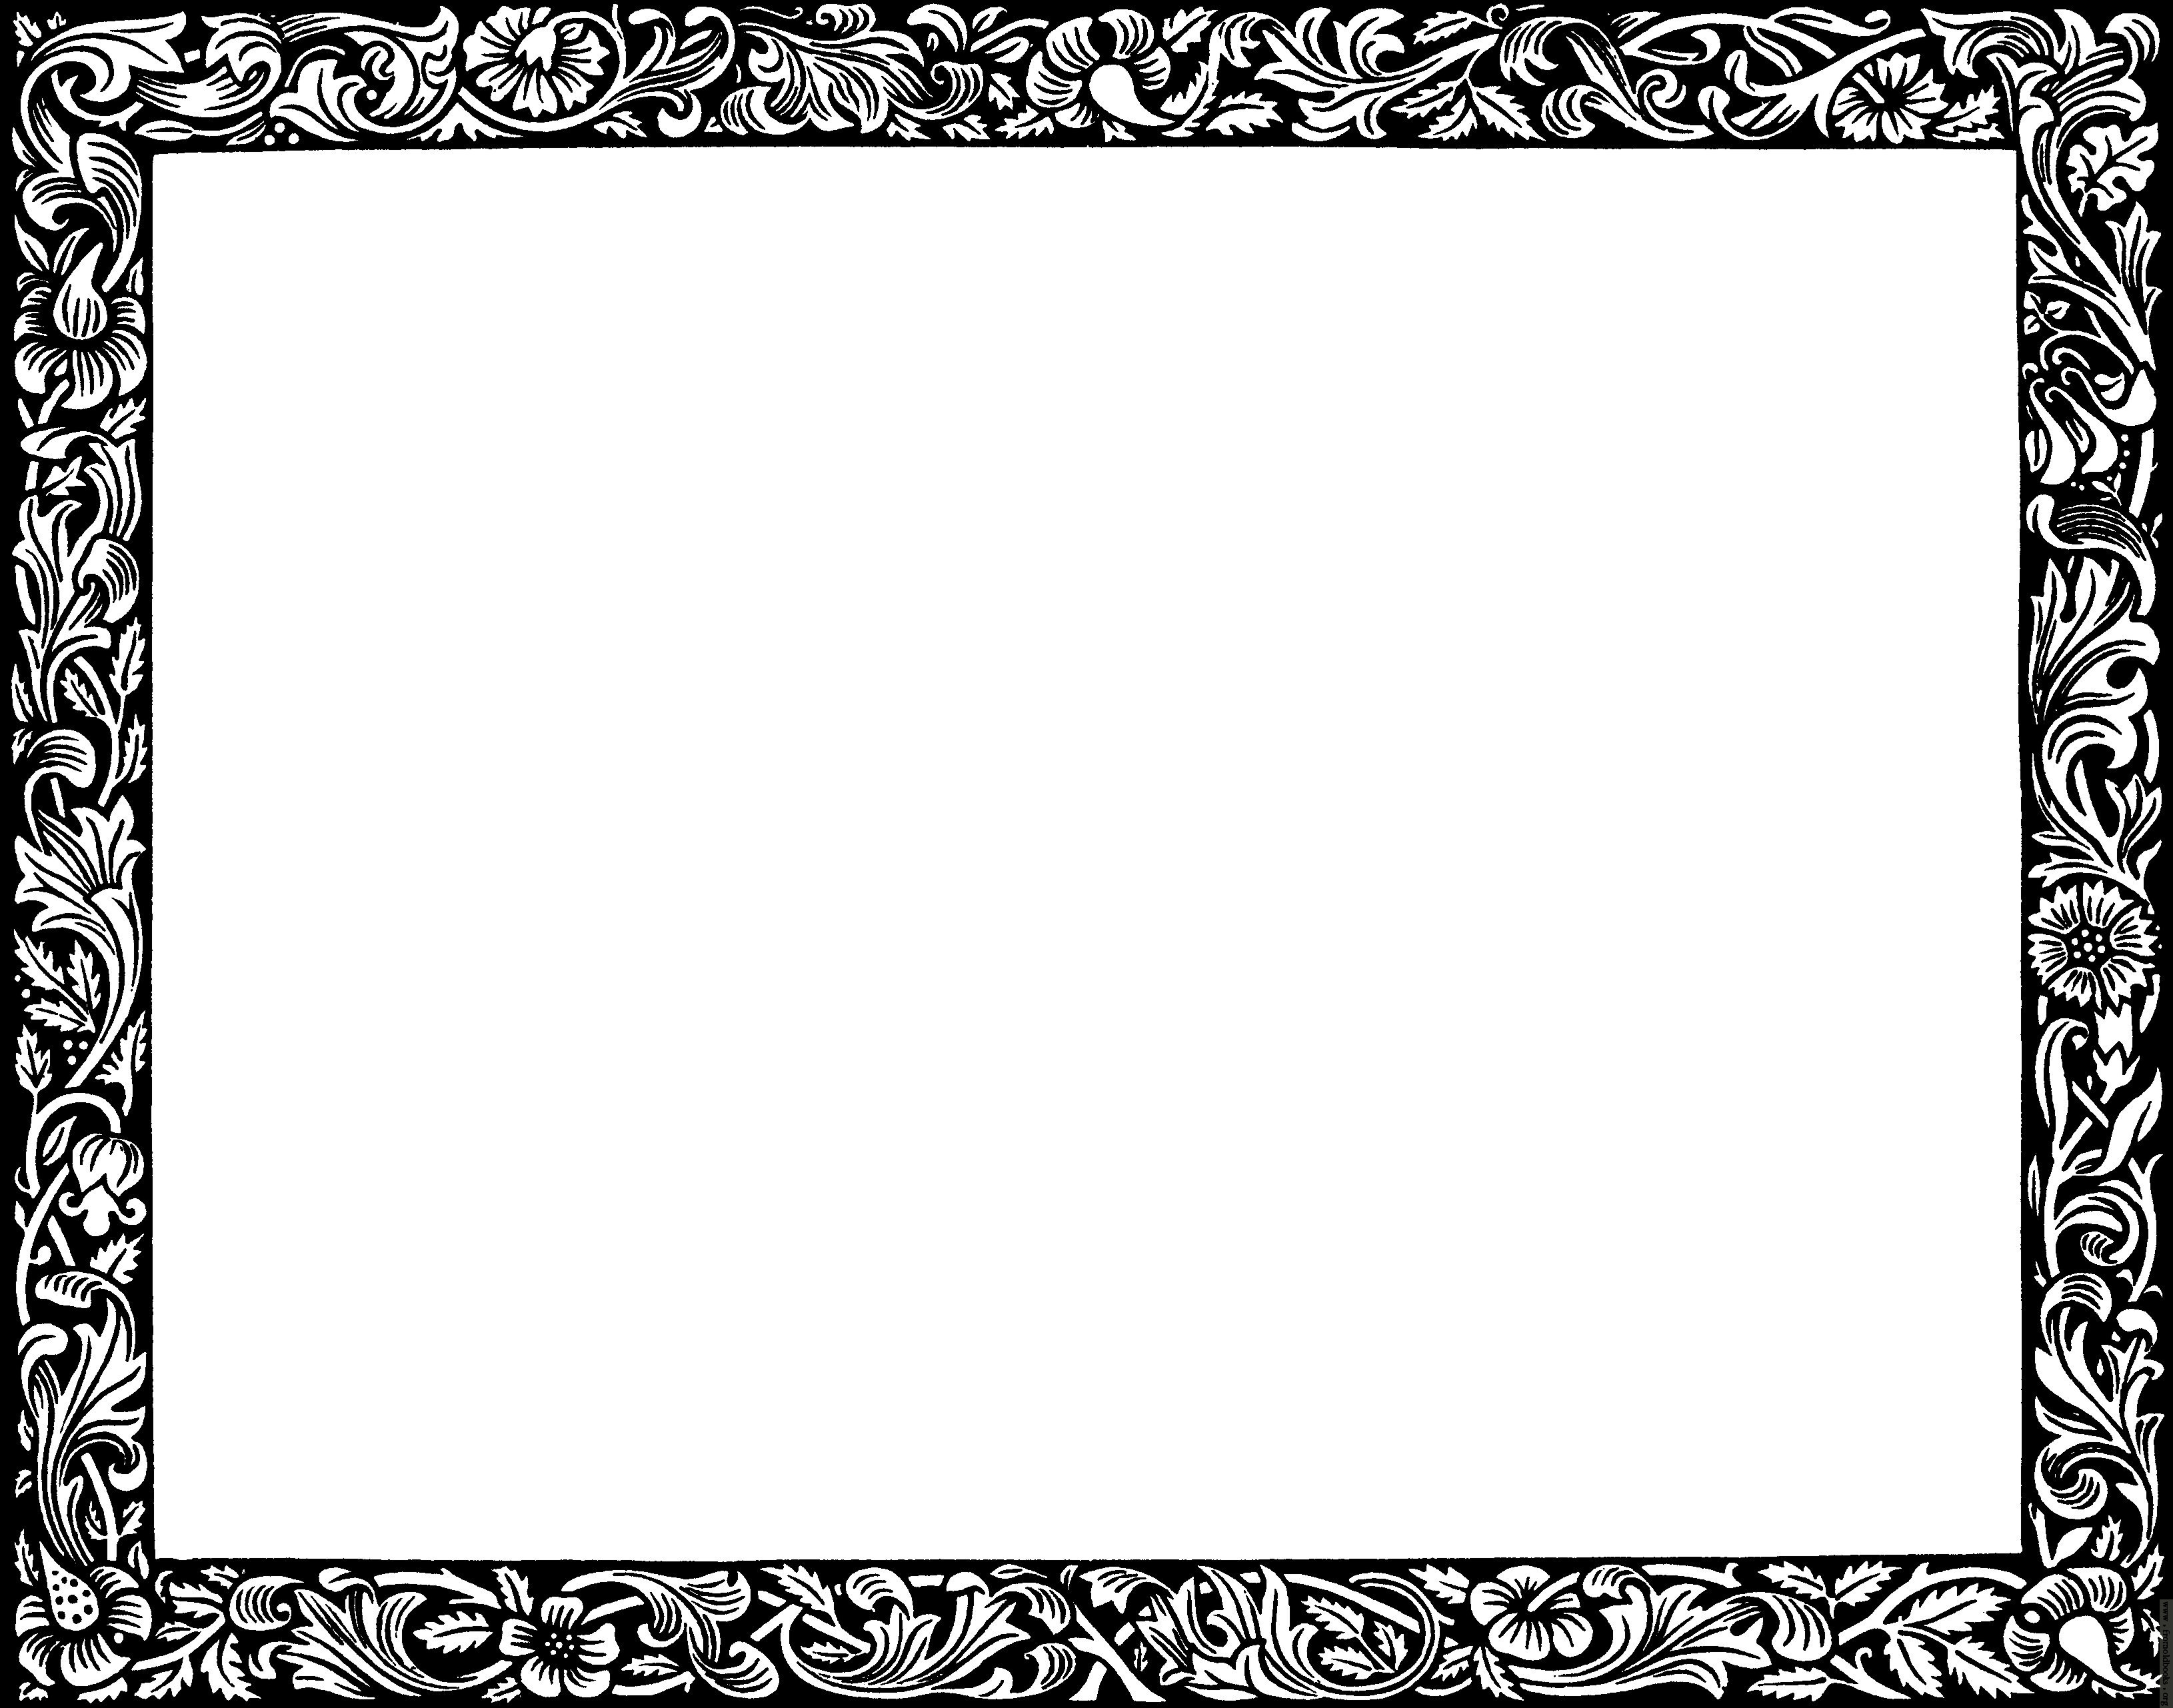 Border For Pictures Free Download - Clipart library